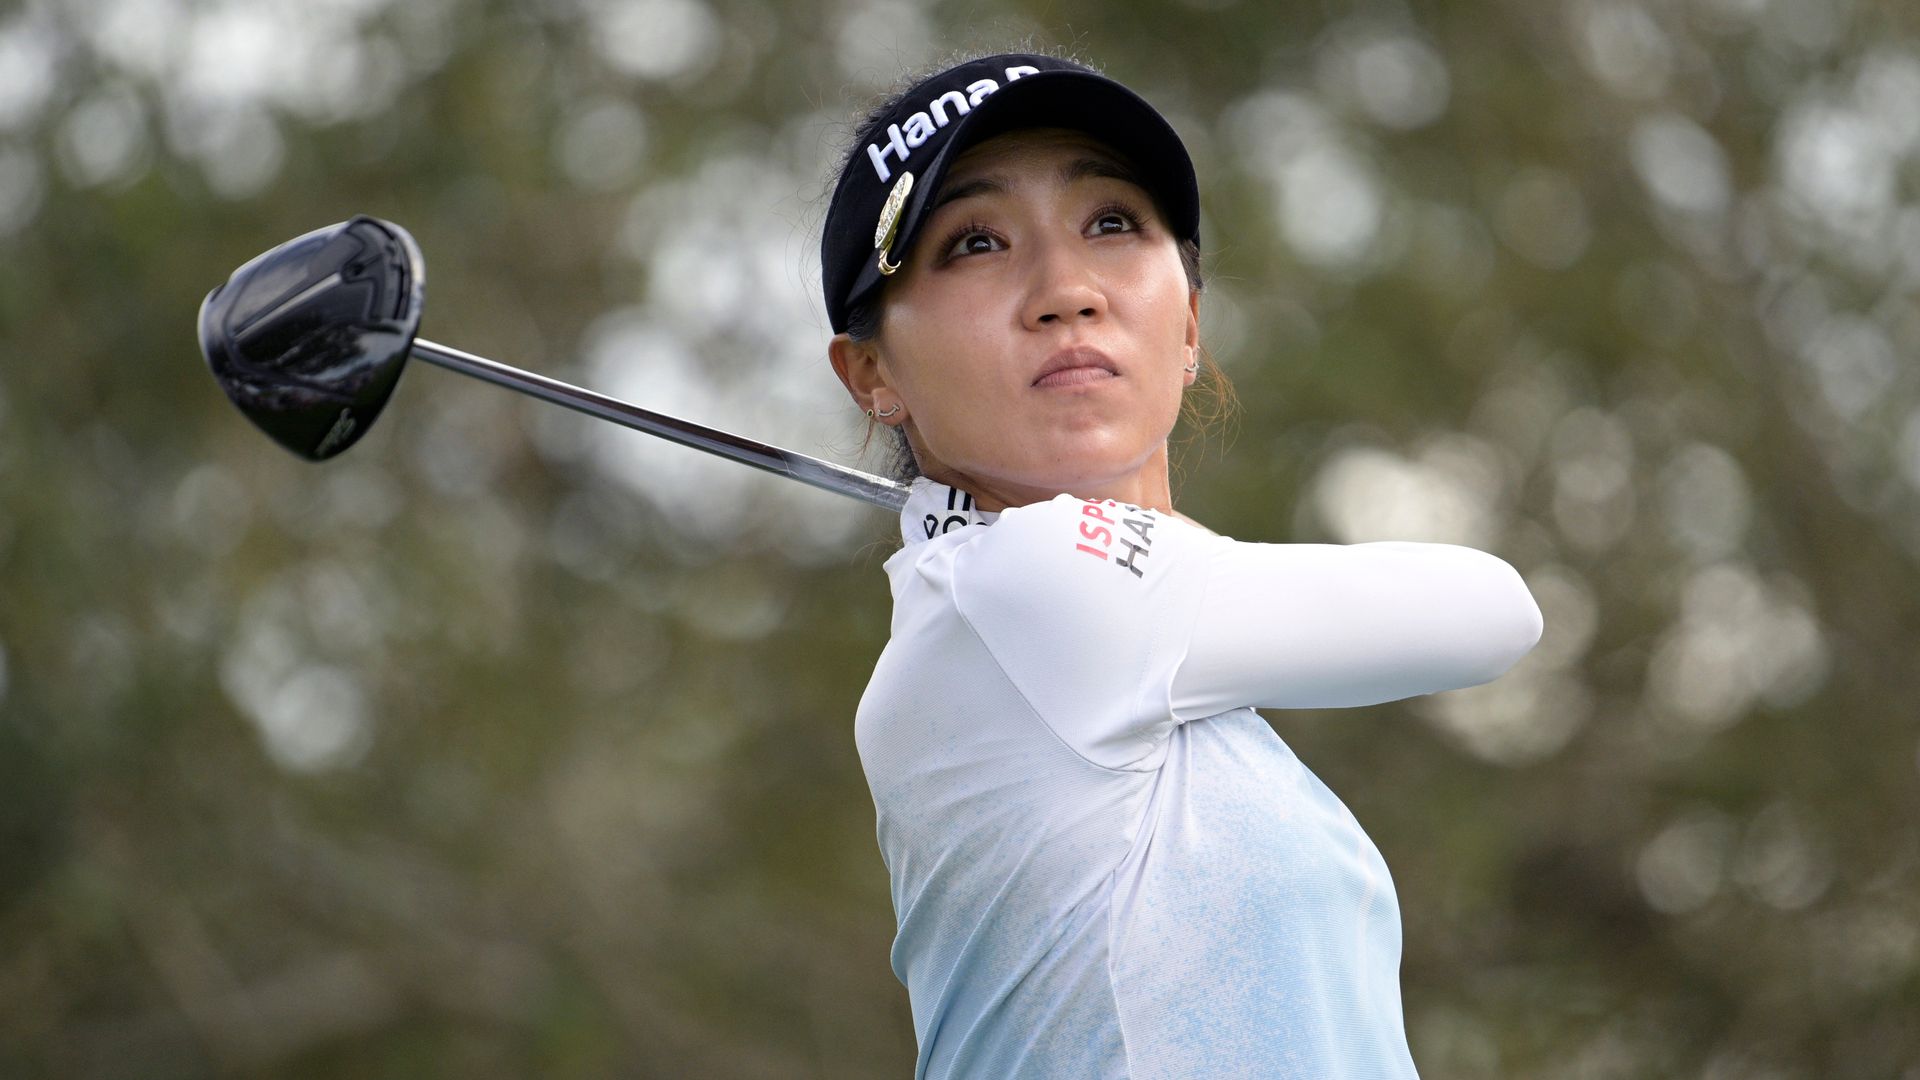 New Zealand's Ko takes CME Group Tour Championship lead